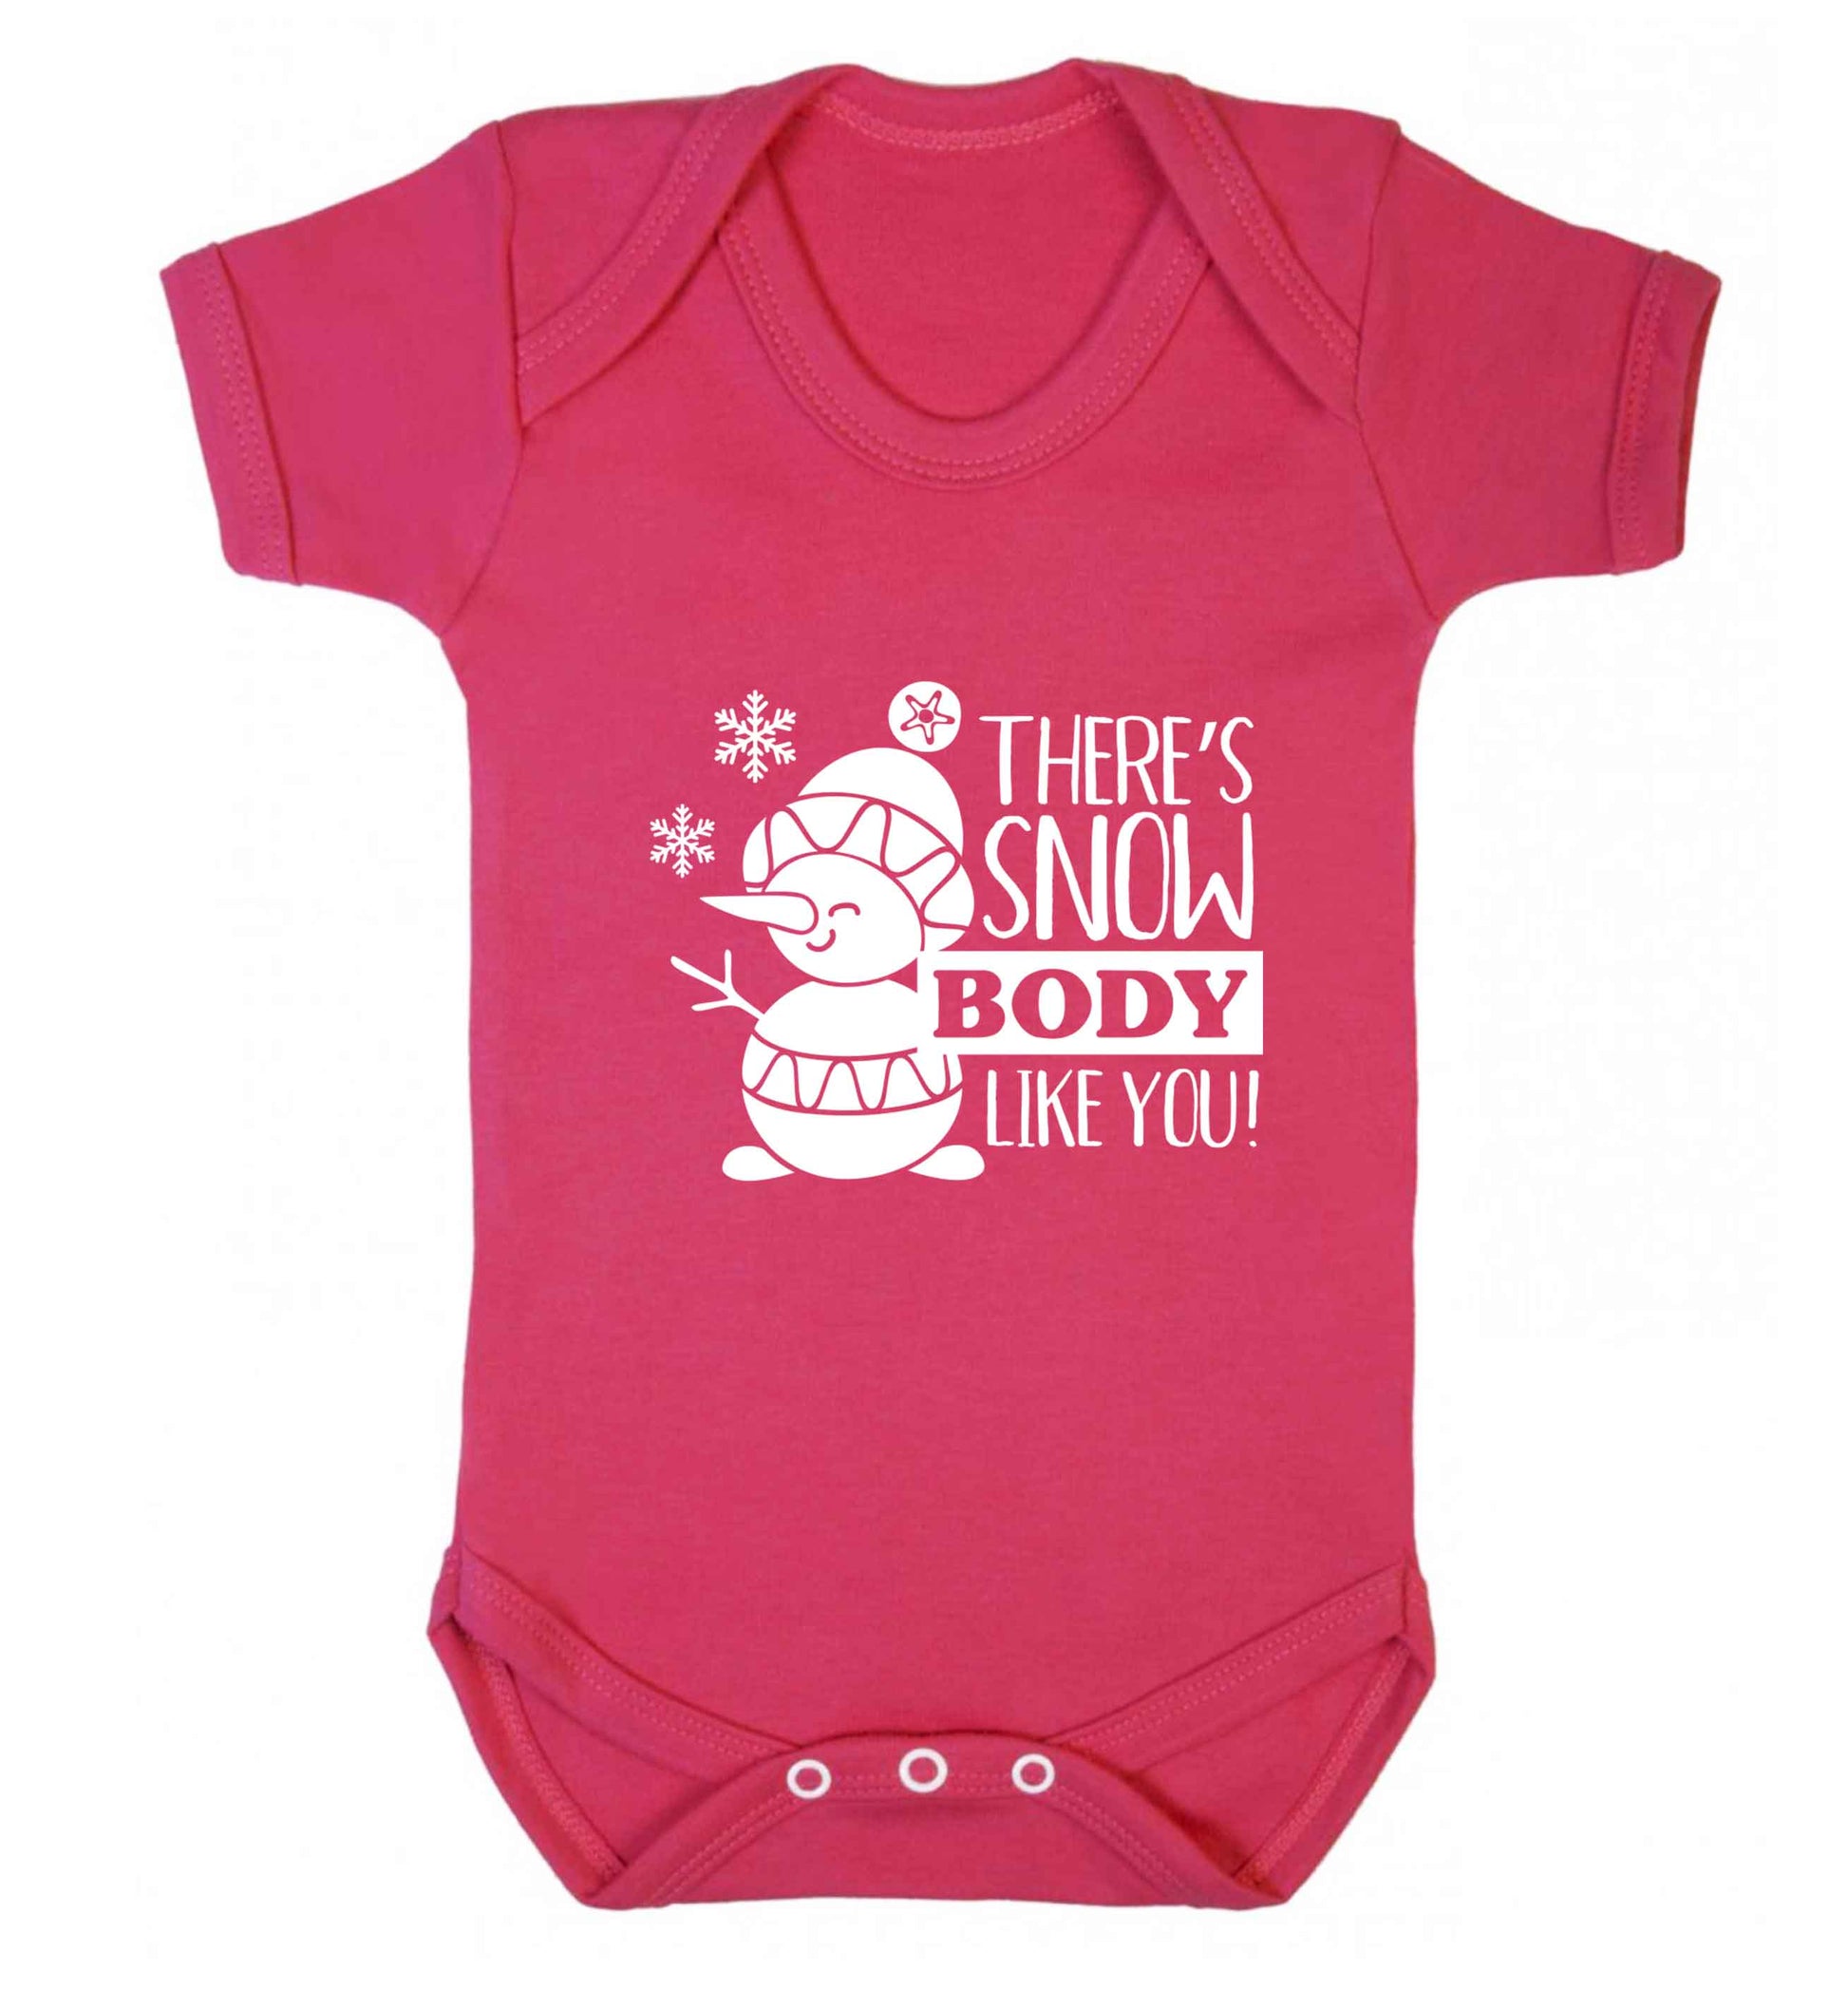 There's snow body like you baby vest dark pink 18-24 months